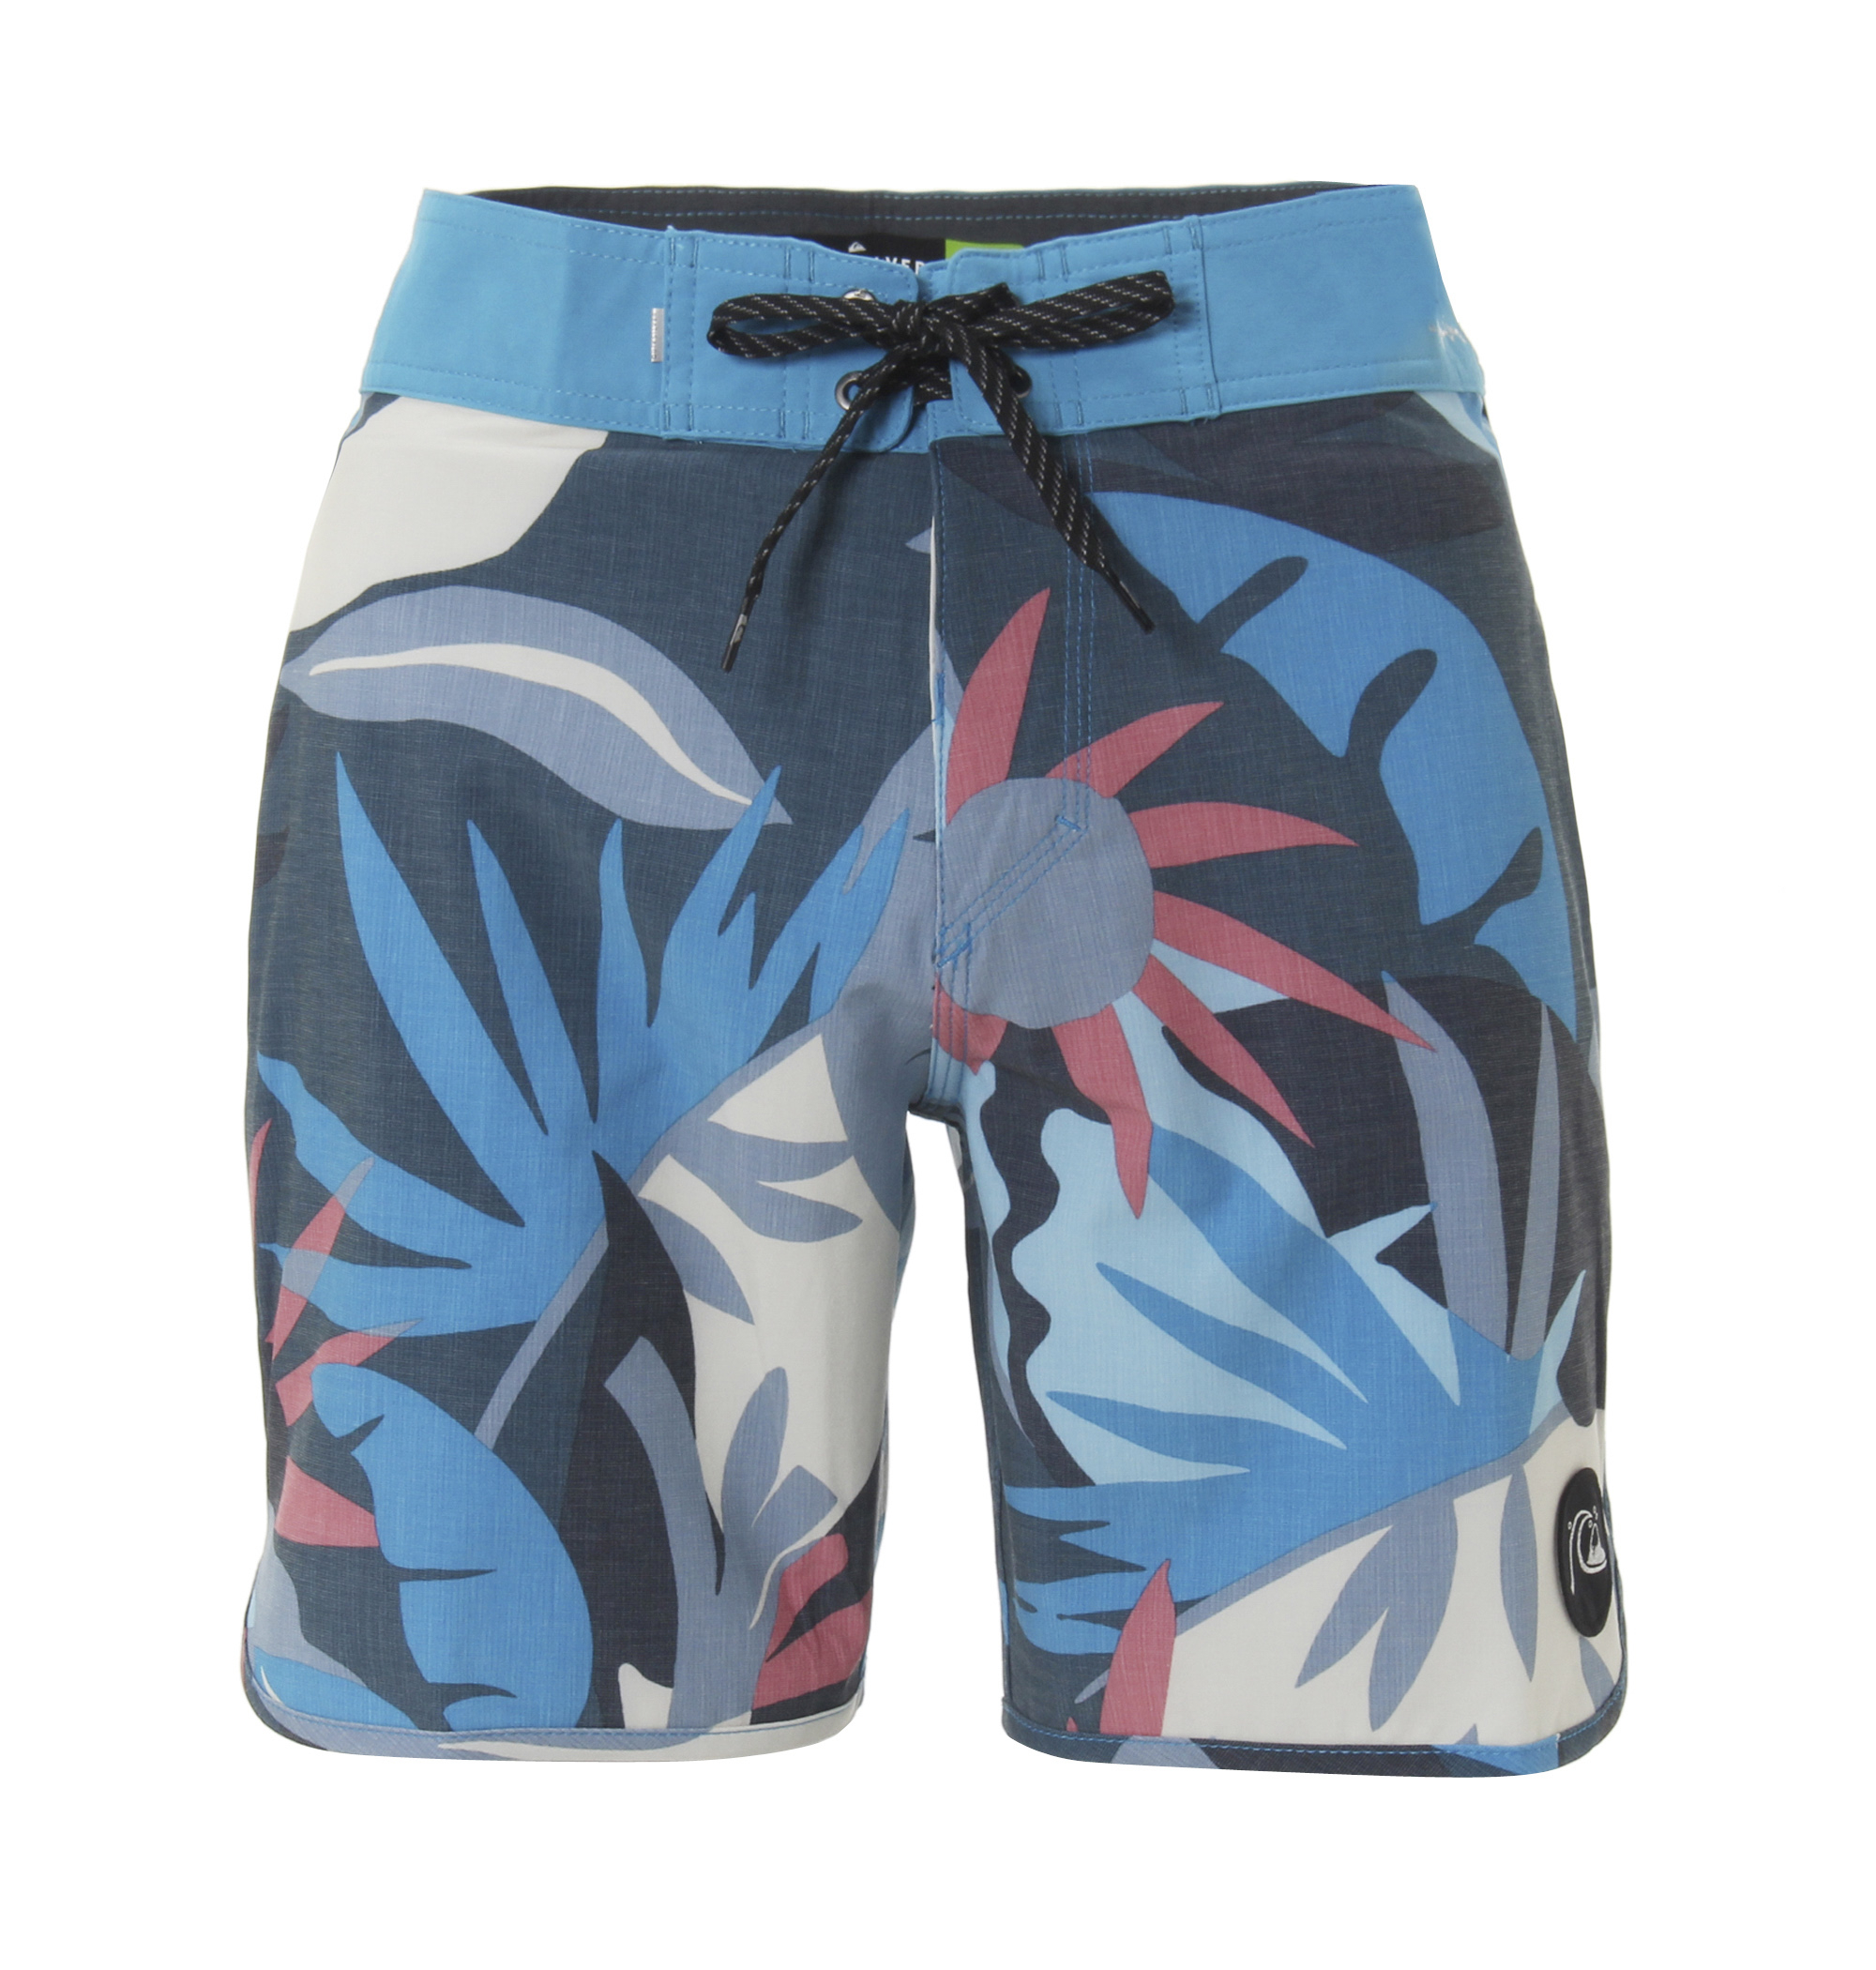 ＜Quiksilver＞ HIGHLINE TROPICAL FLOW 18 多彩な色使いのボタニカル柄が印象的なボードショーツ